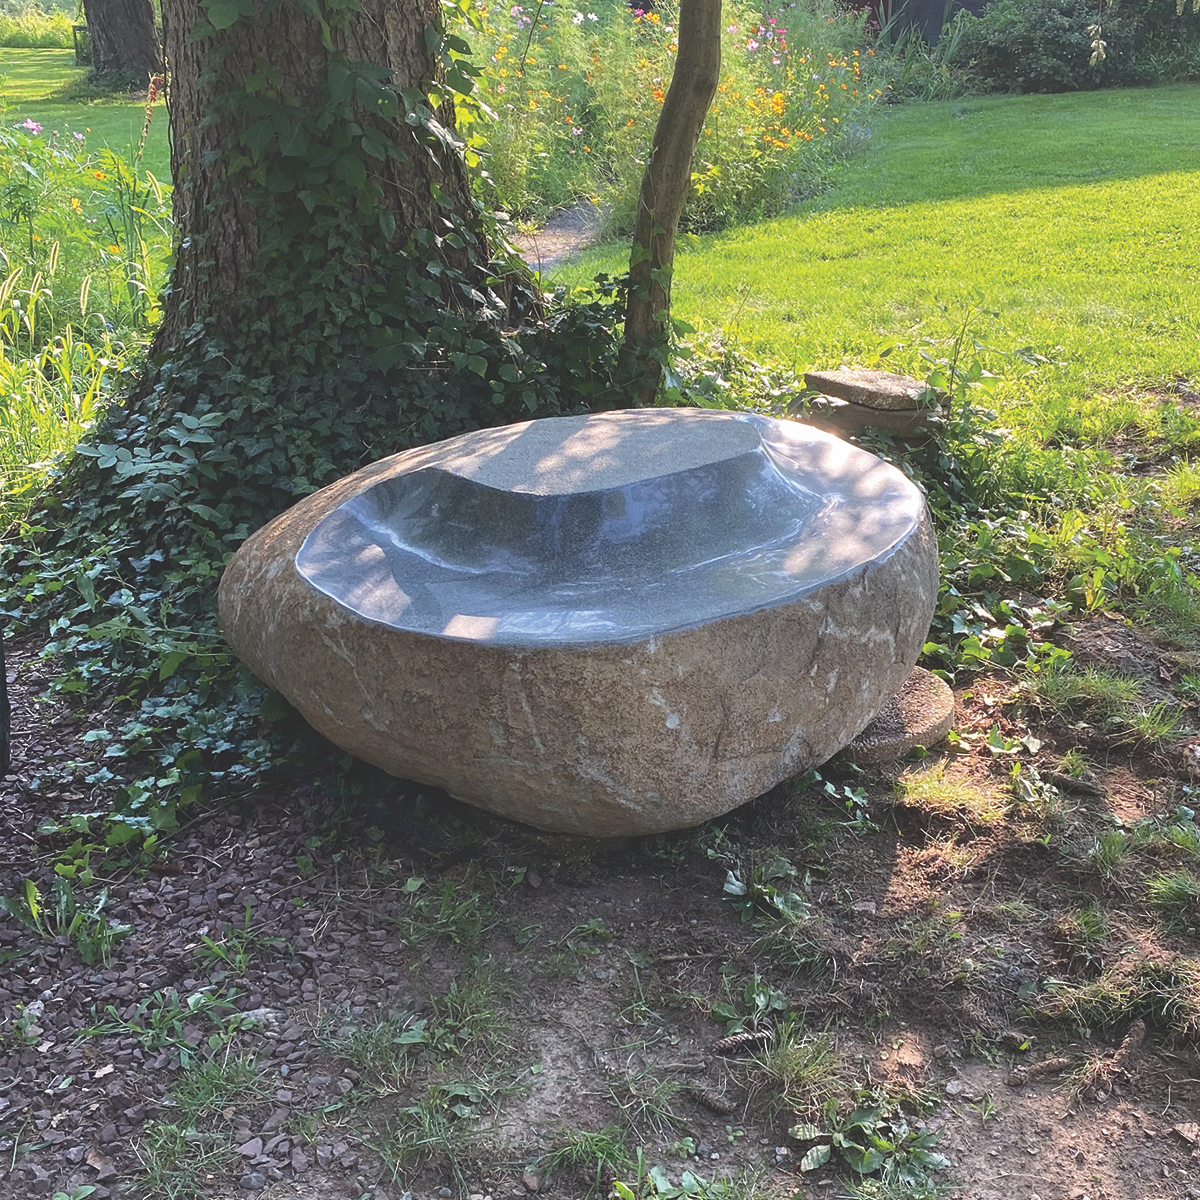 Justin Anchinsko following in the footsteps of his father, Steven Snyder, to create bold stone benches!